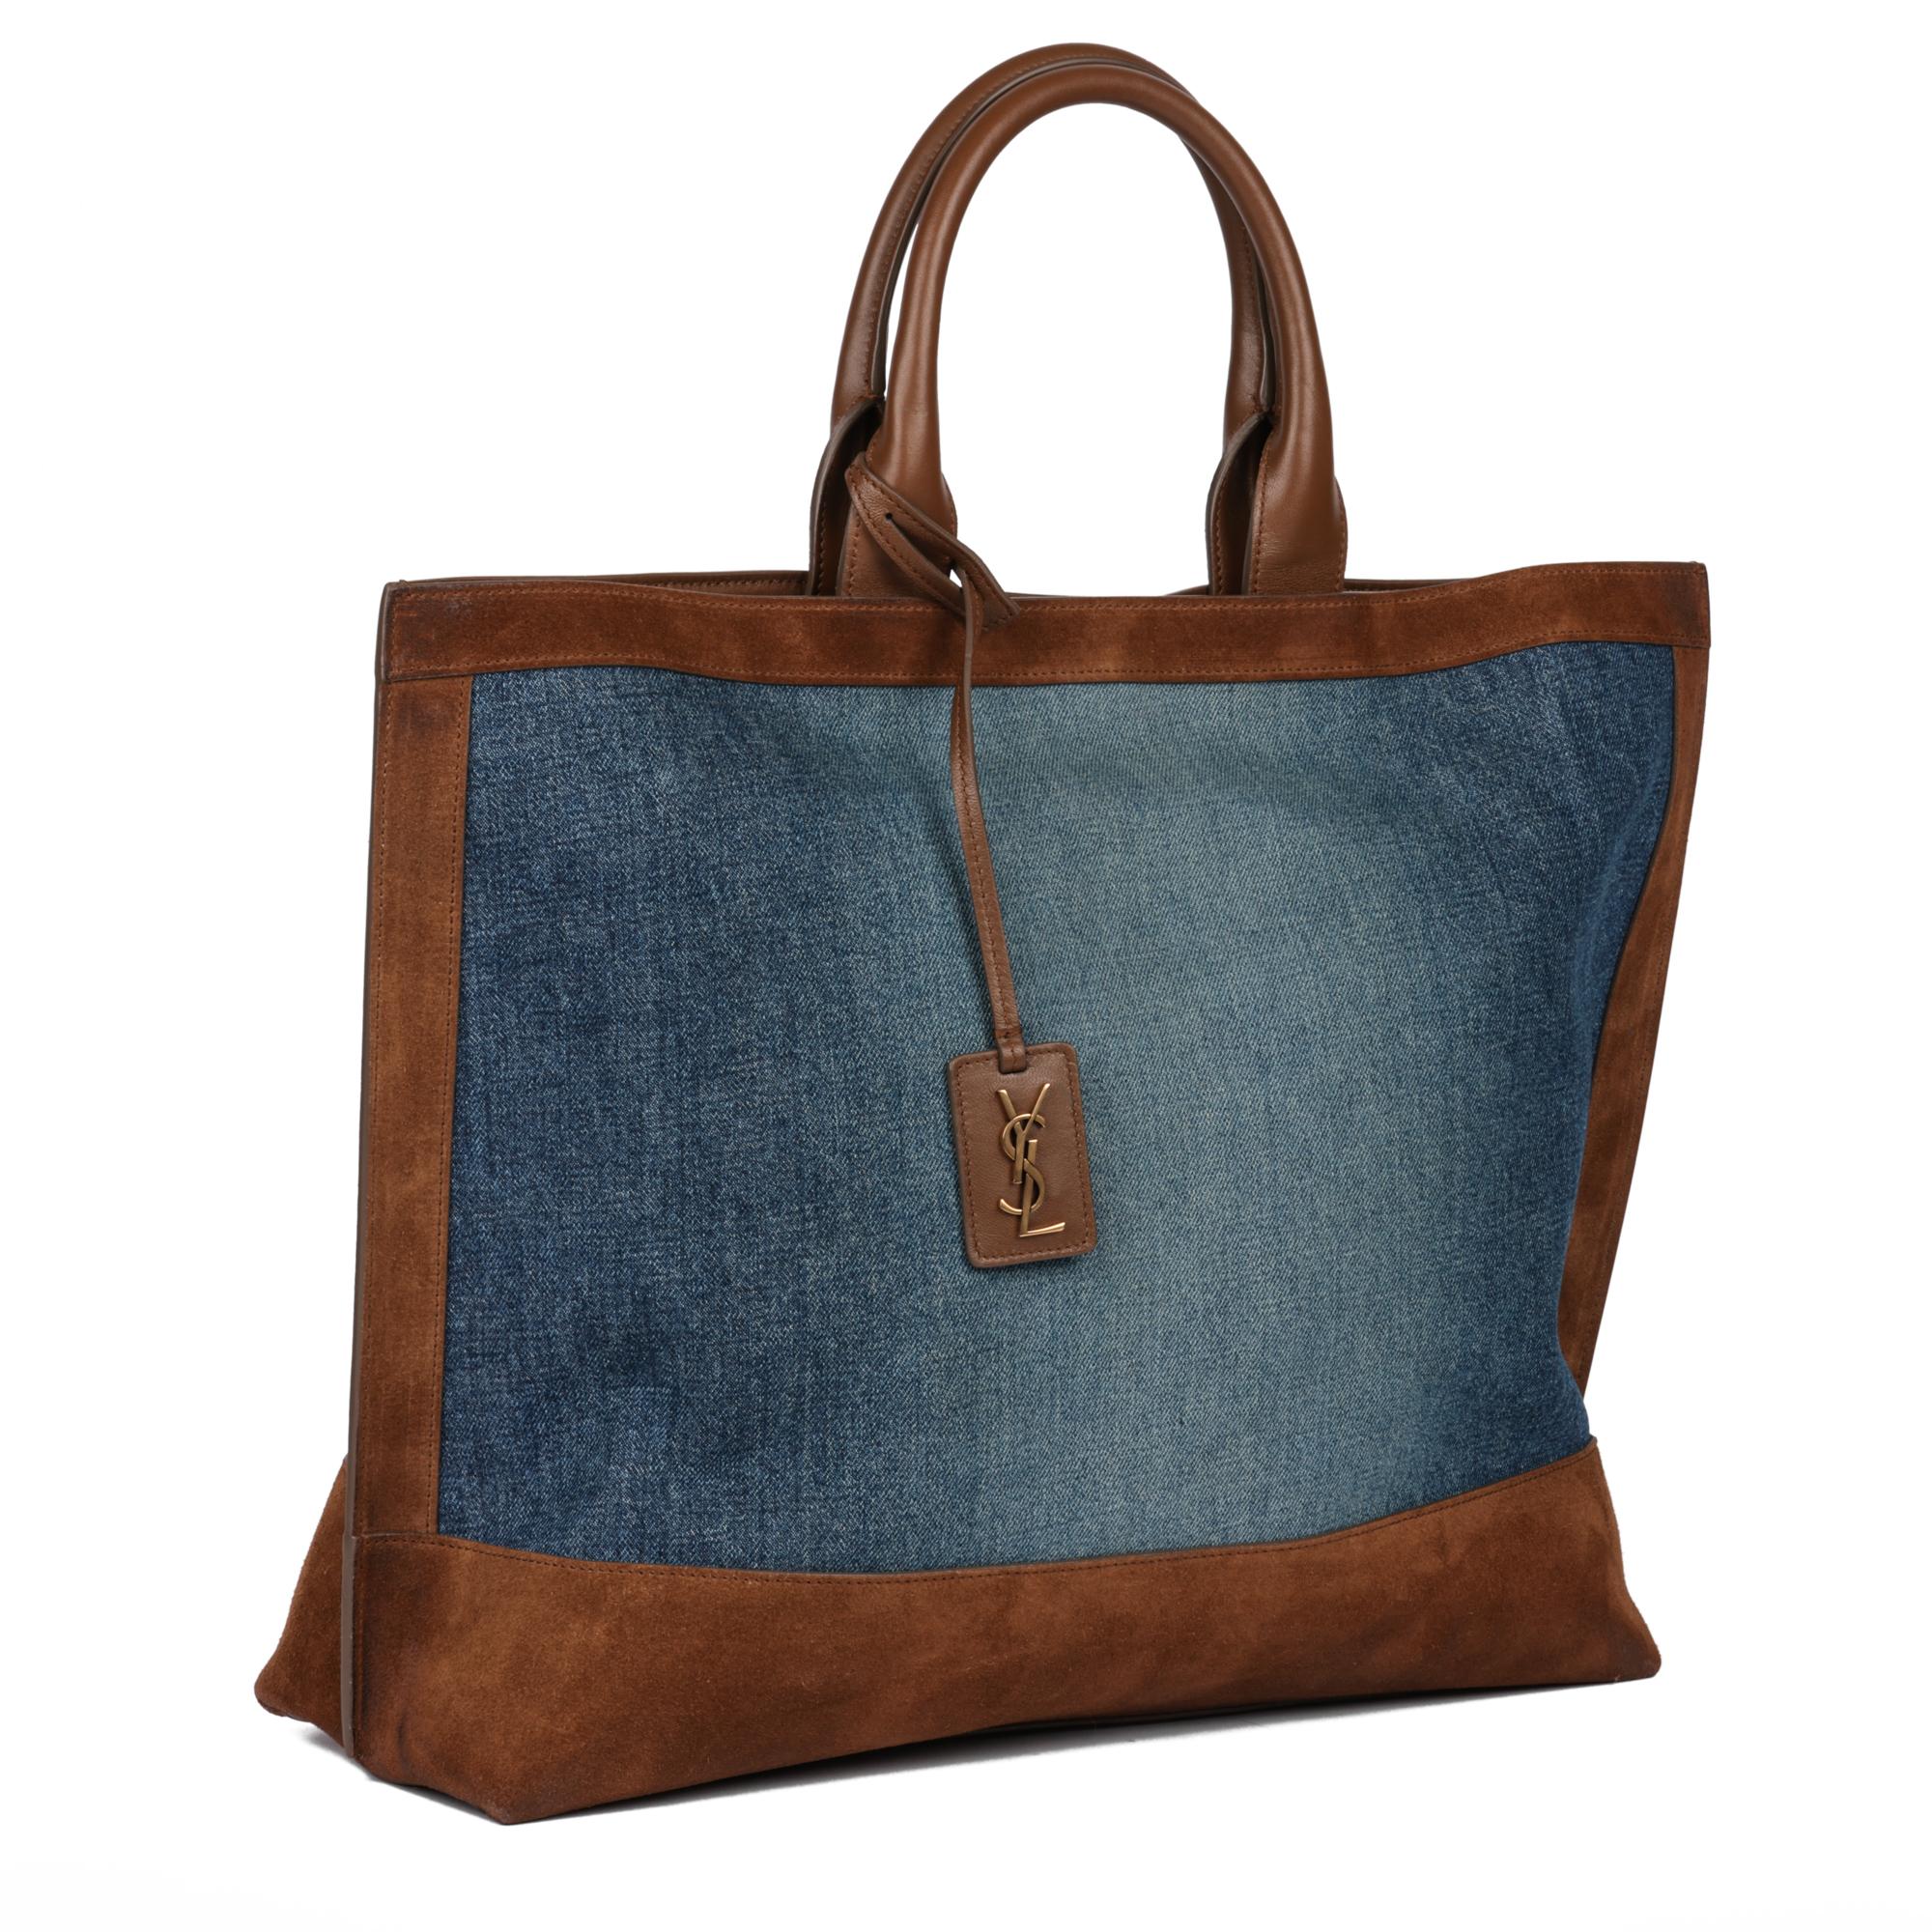 Saint Laurent Blue Denim and Brown Suede Shopping Tote

CONDITION NOTES
The exterior is in excellent condition with light signs of use.
The interior is in excellent condition with light signs of use.
The hardware is in excellent condition with light